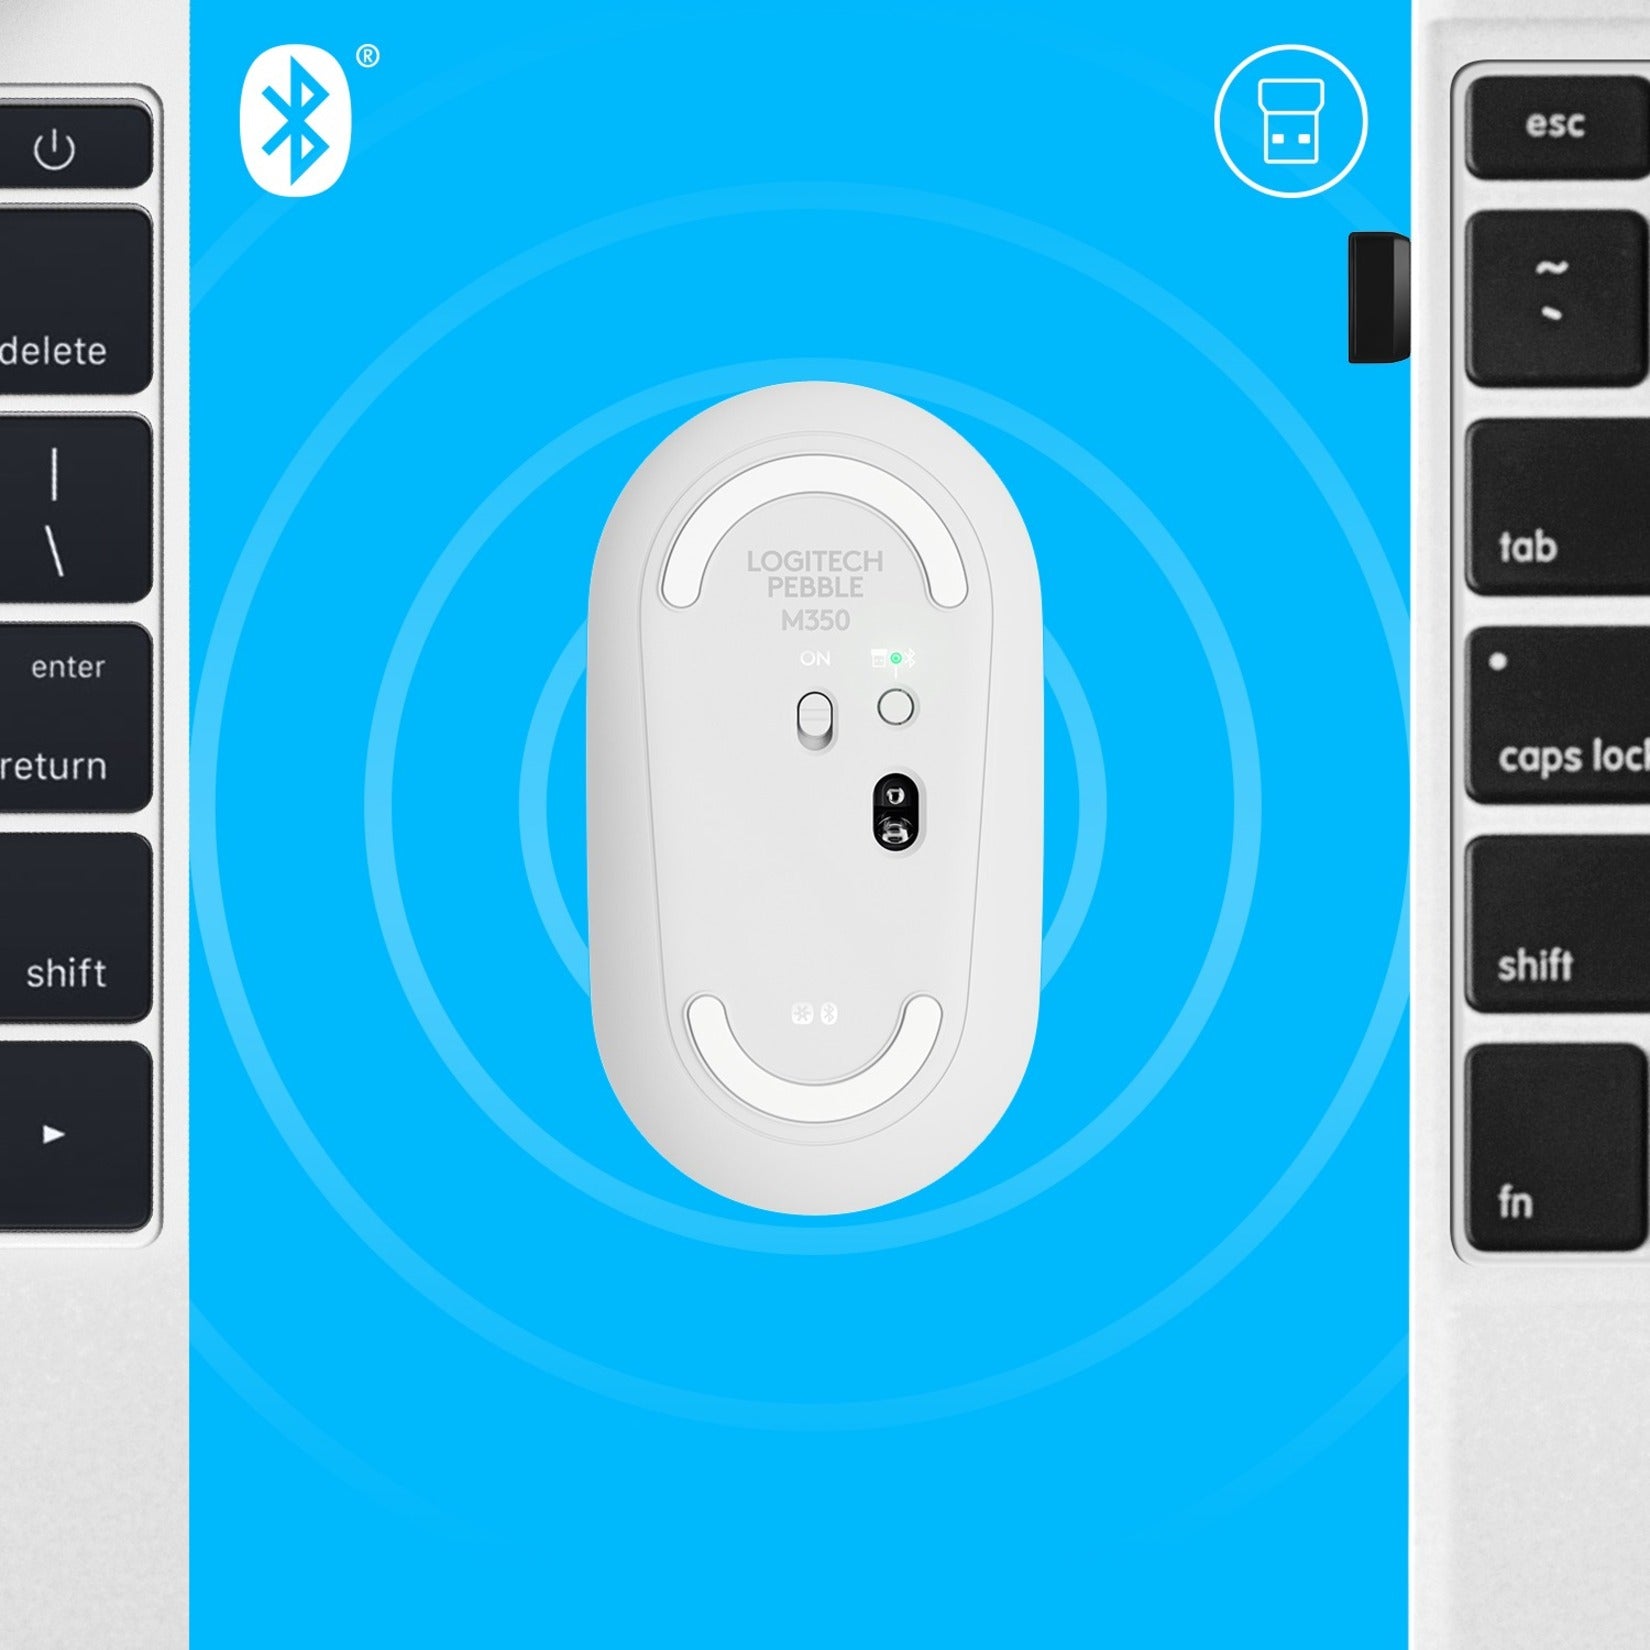 Logitech Pebble Wireless Mouse M350 - Bluetooth/Radio Frequency, Optical, Off White [Discontinued]